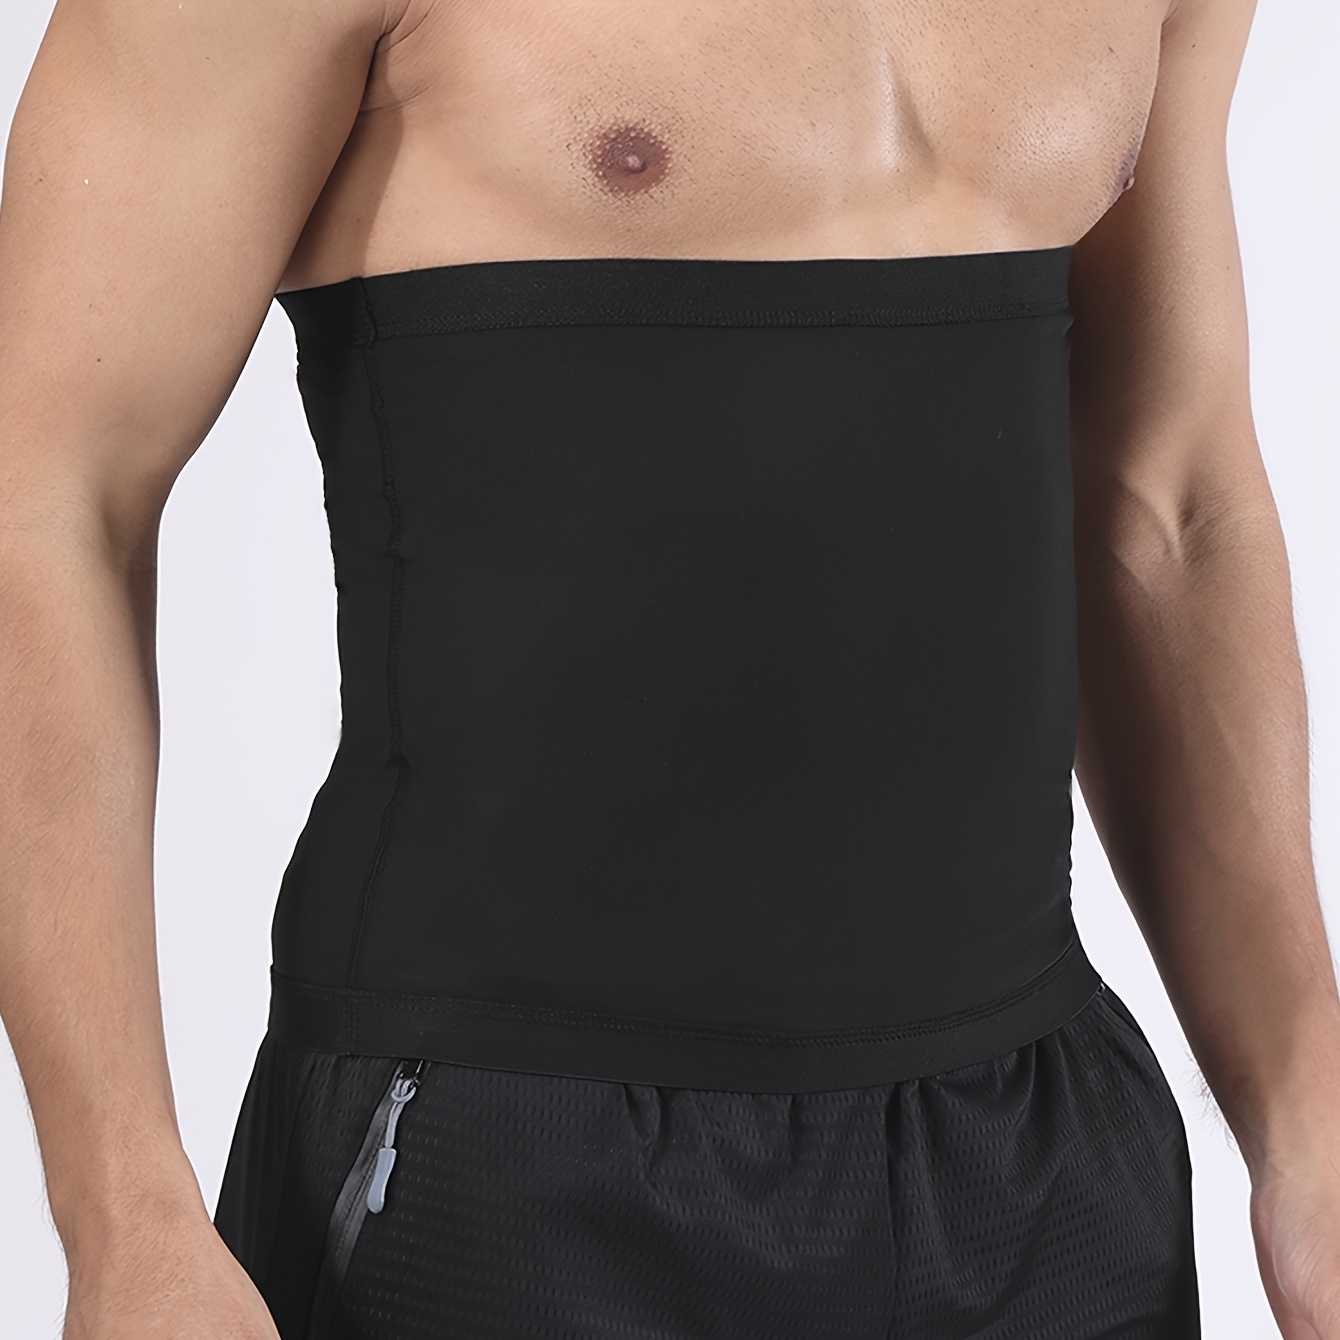 Fitness deals: Go big of tummy reduction with sweat belts, get up to 78%  off